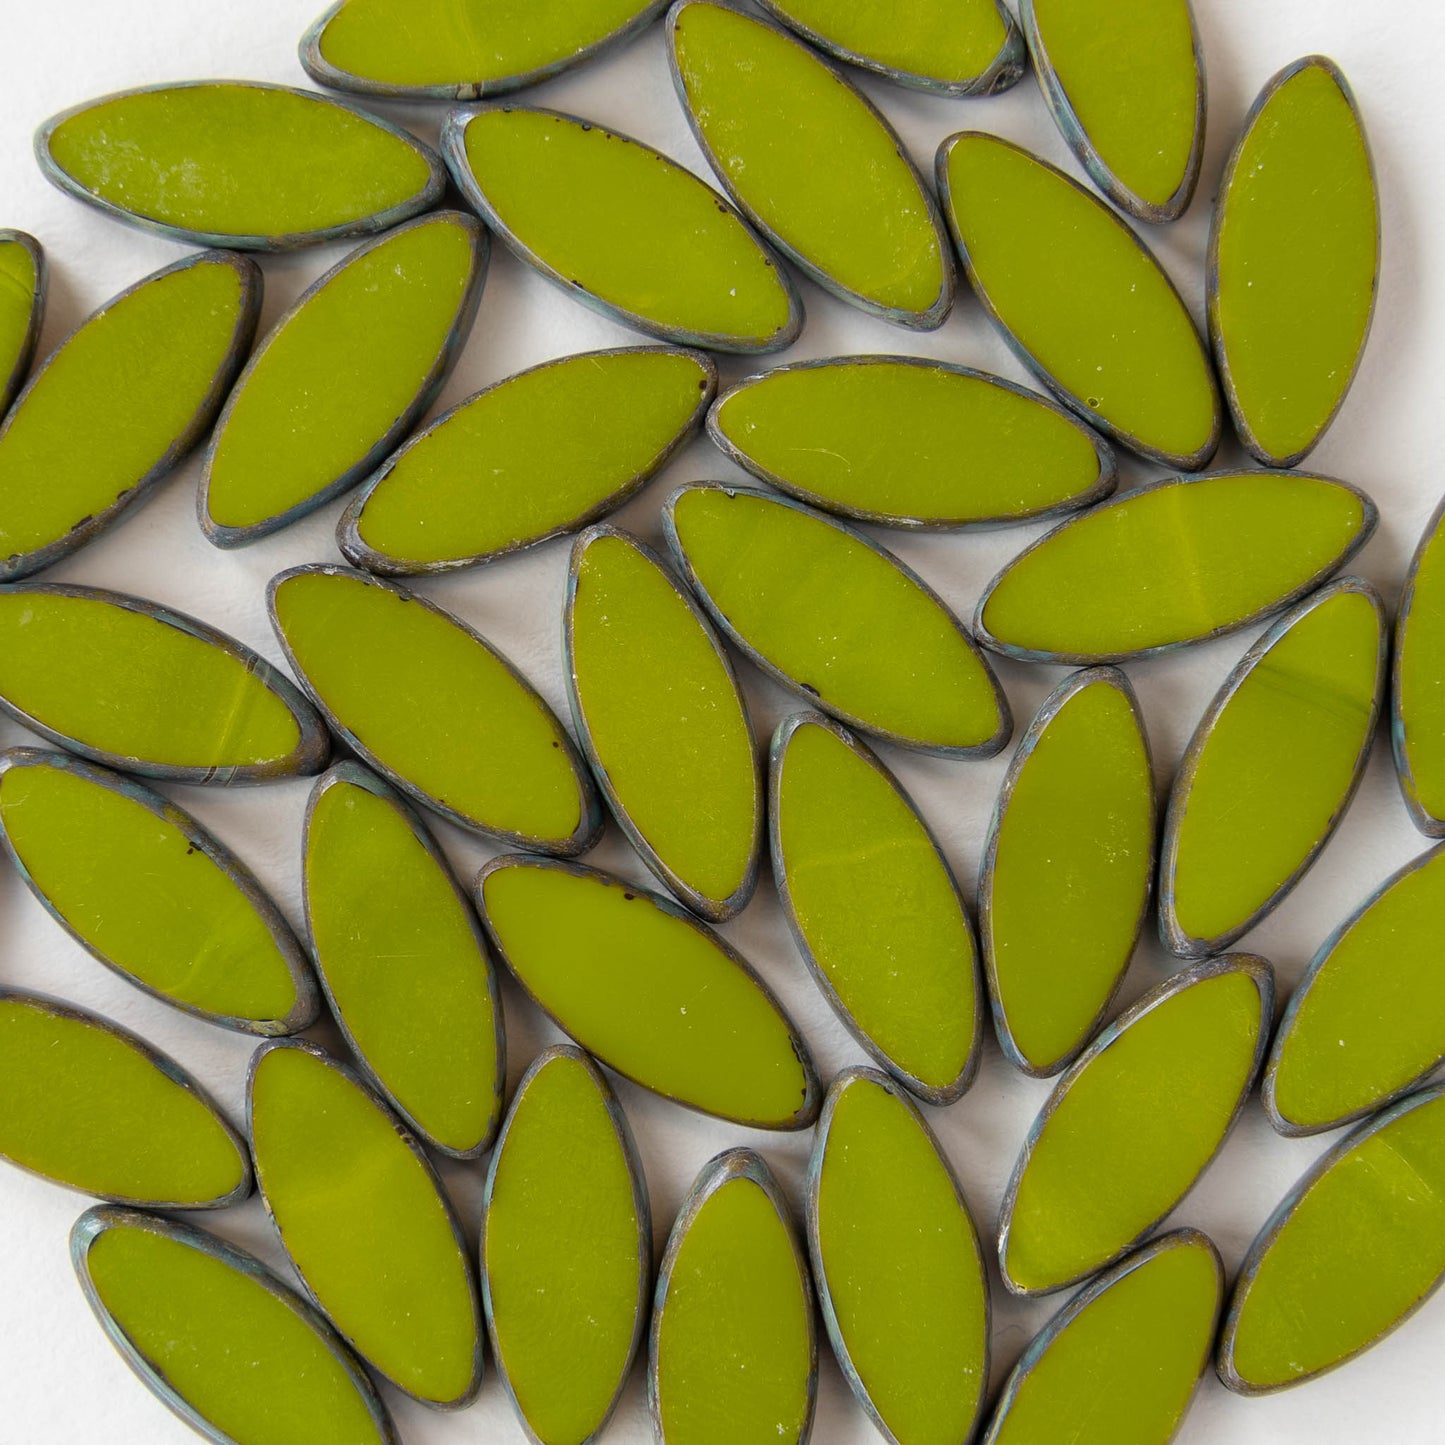 18mm Spindle Beads - Olive Green with Picasso Edges - 10 beads